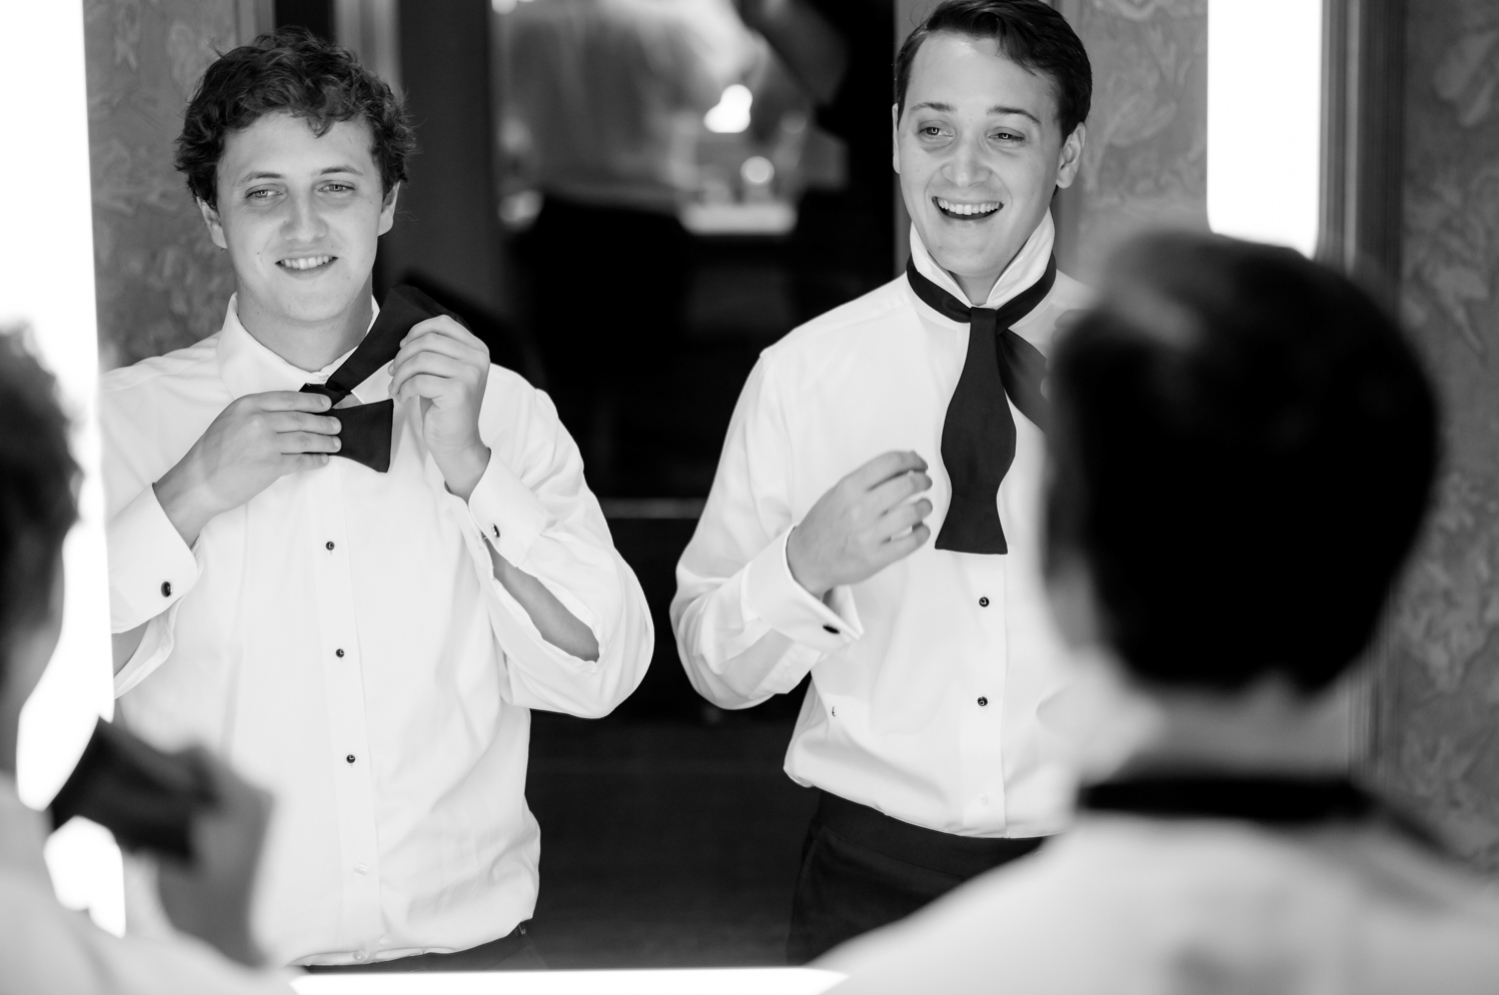 The groom and his brother tie their bowties in the mirror and laugh together.